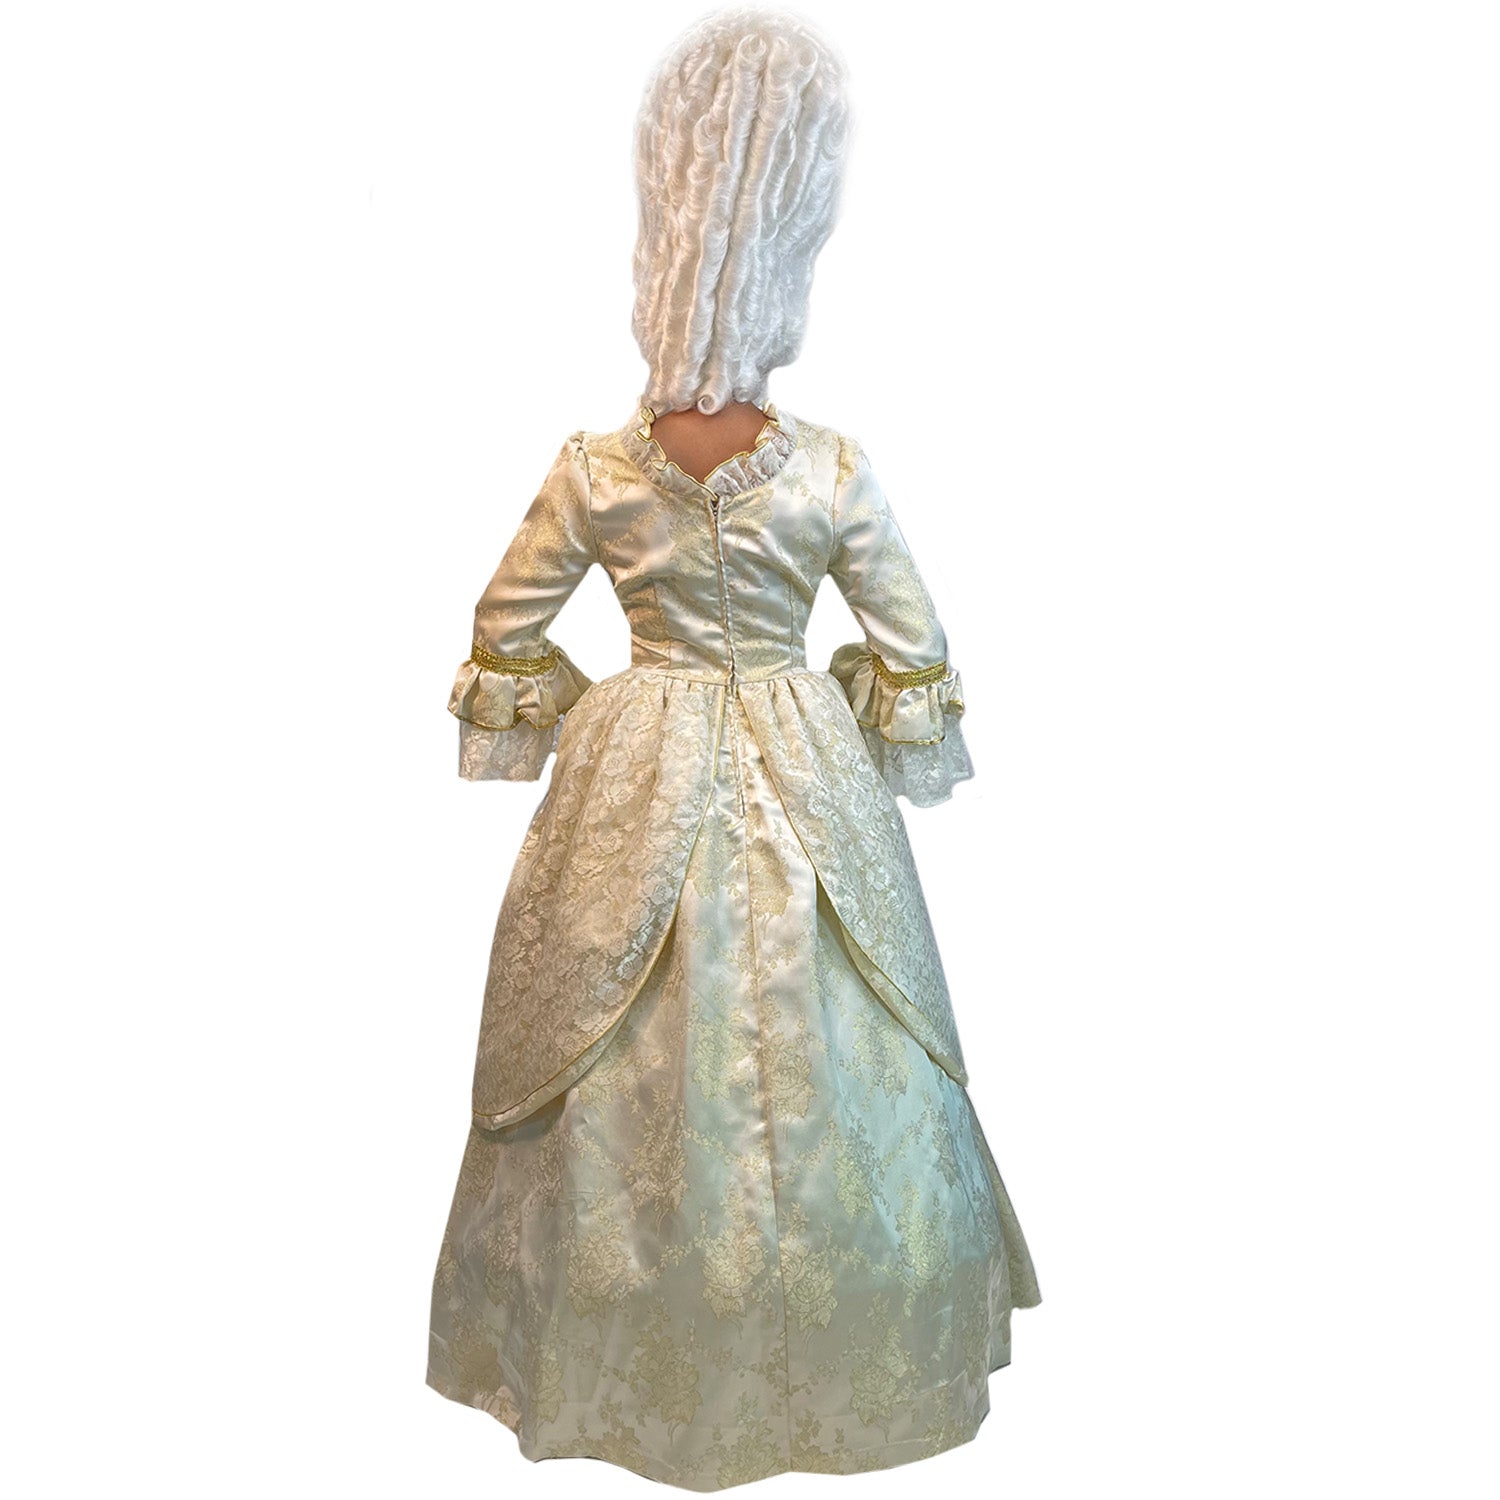 Women's Marie Antoinette Dress S Blue at  Women's Clothing store:  Adult Sized Costumes